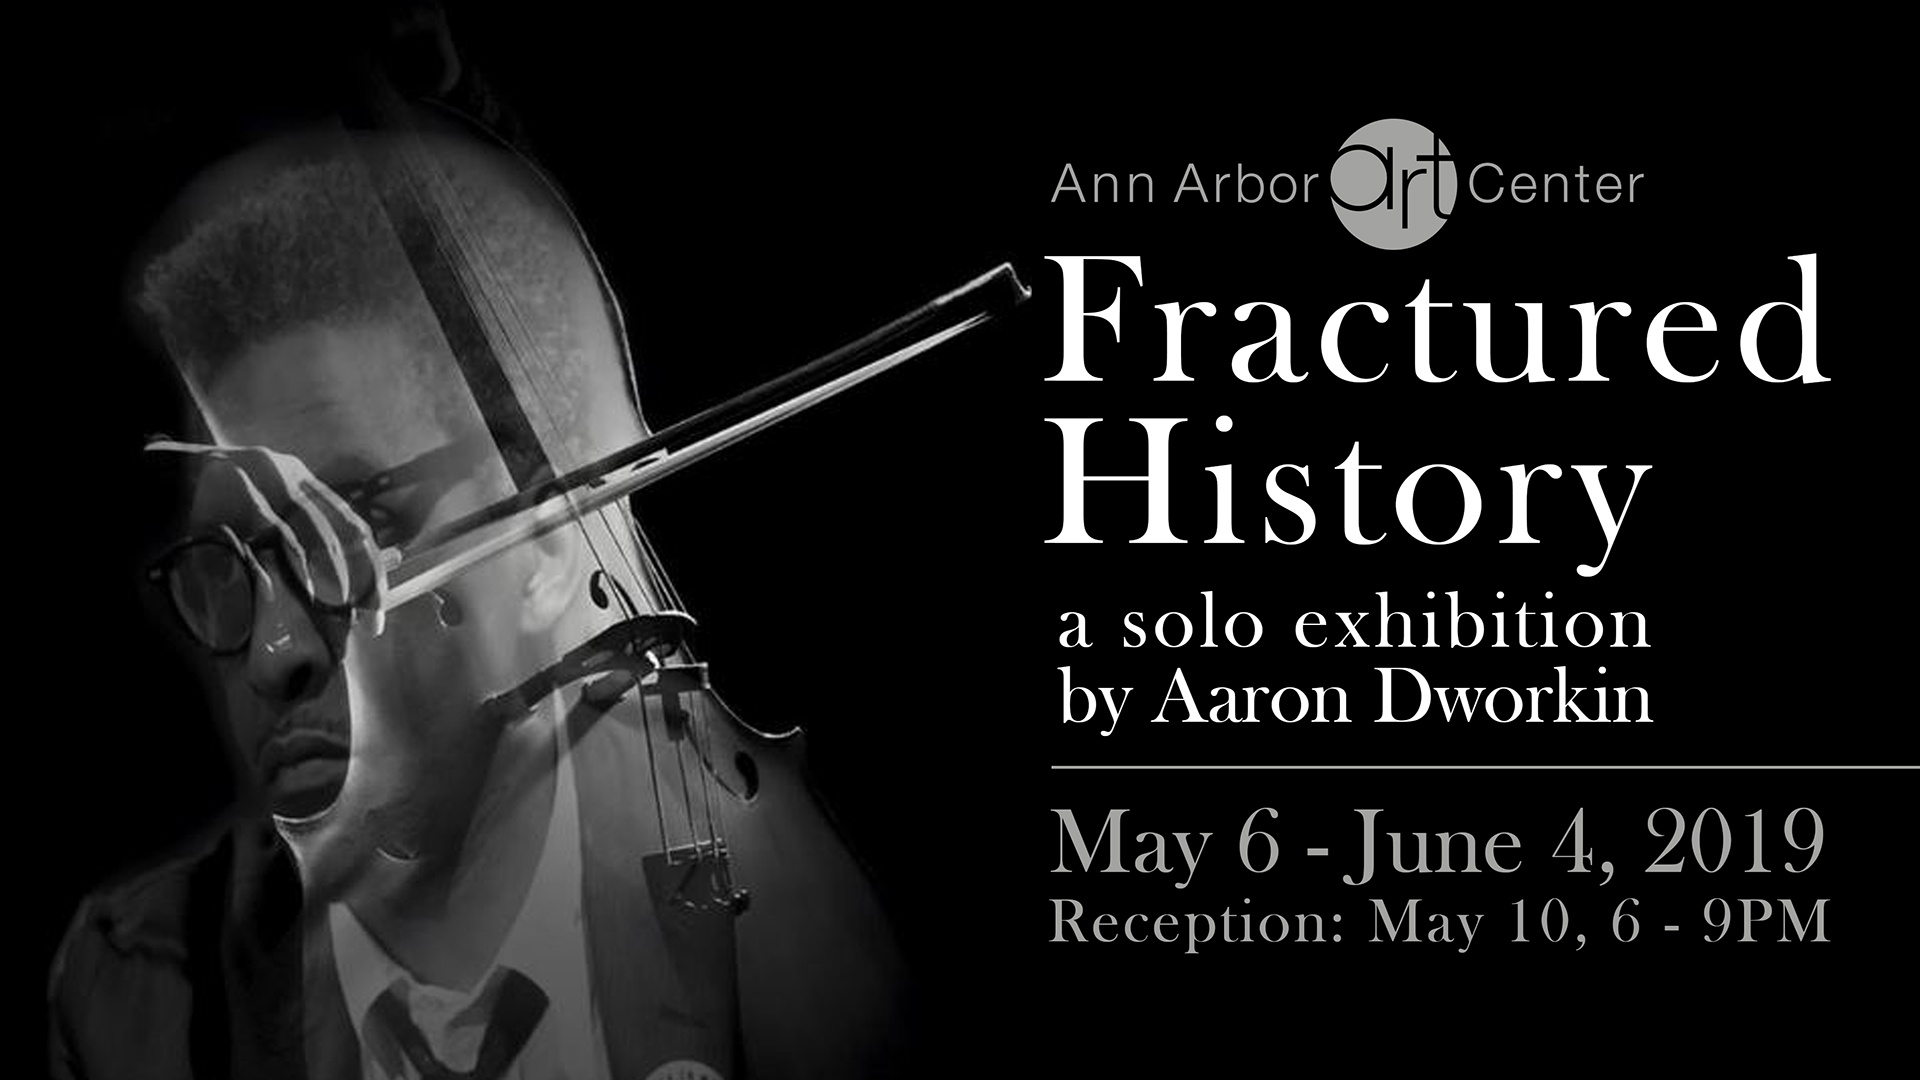 FRACTURED HISTORY, MAY 6 - JUNE 4, 2019